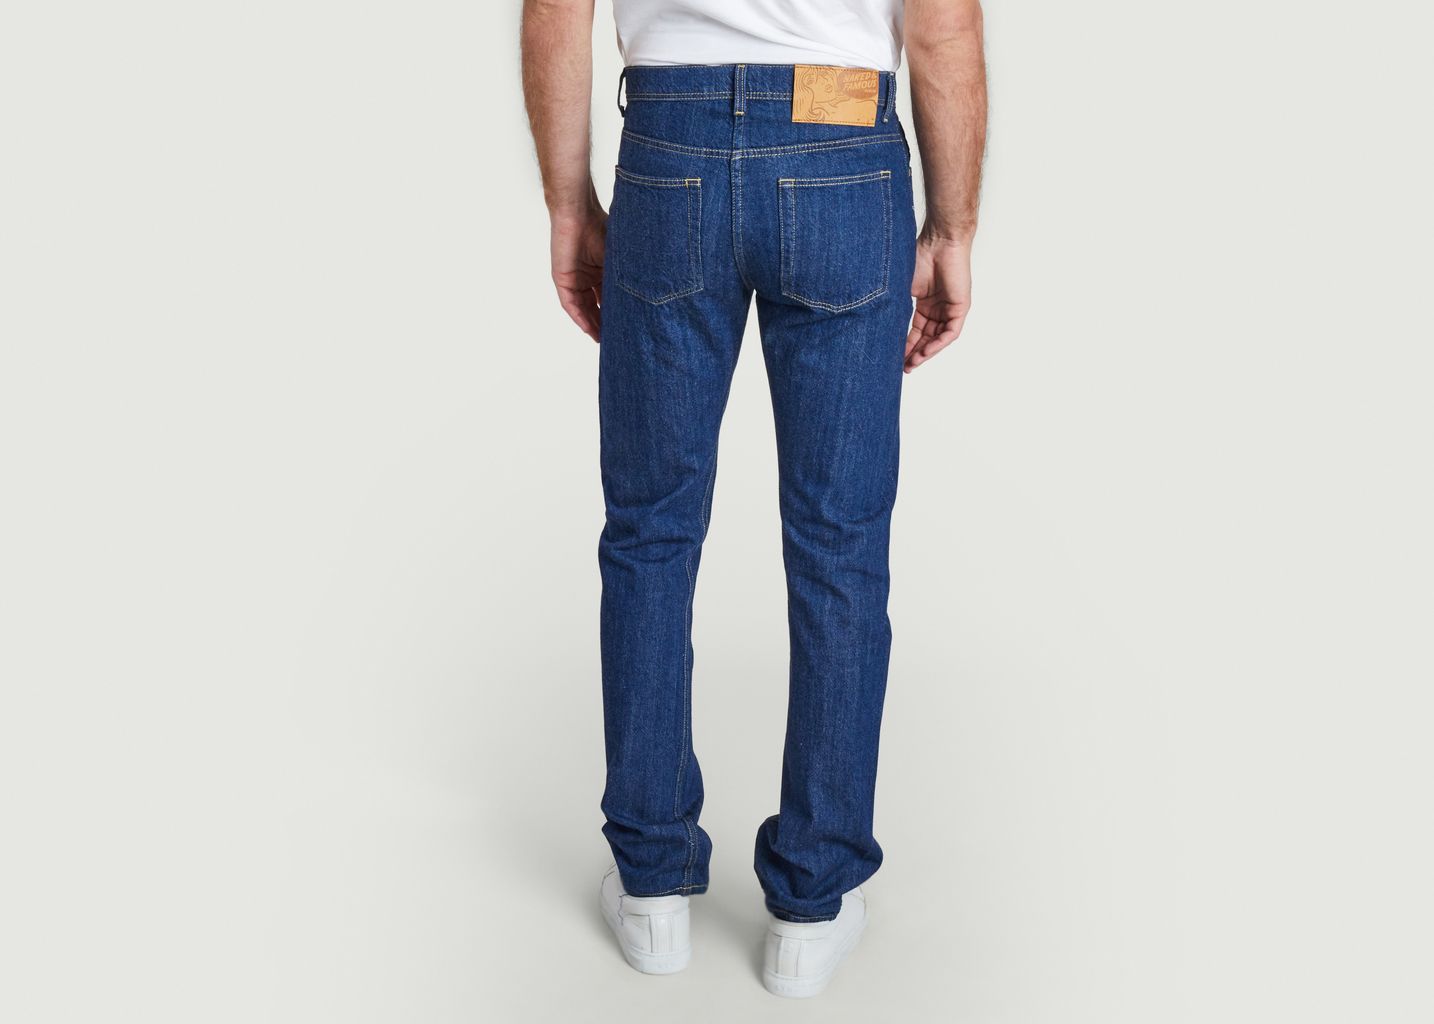 New Frontier Selvedge Weird Guy Jeans - Naked and Famous